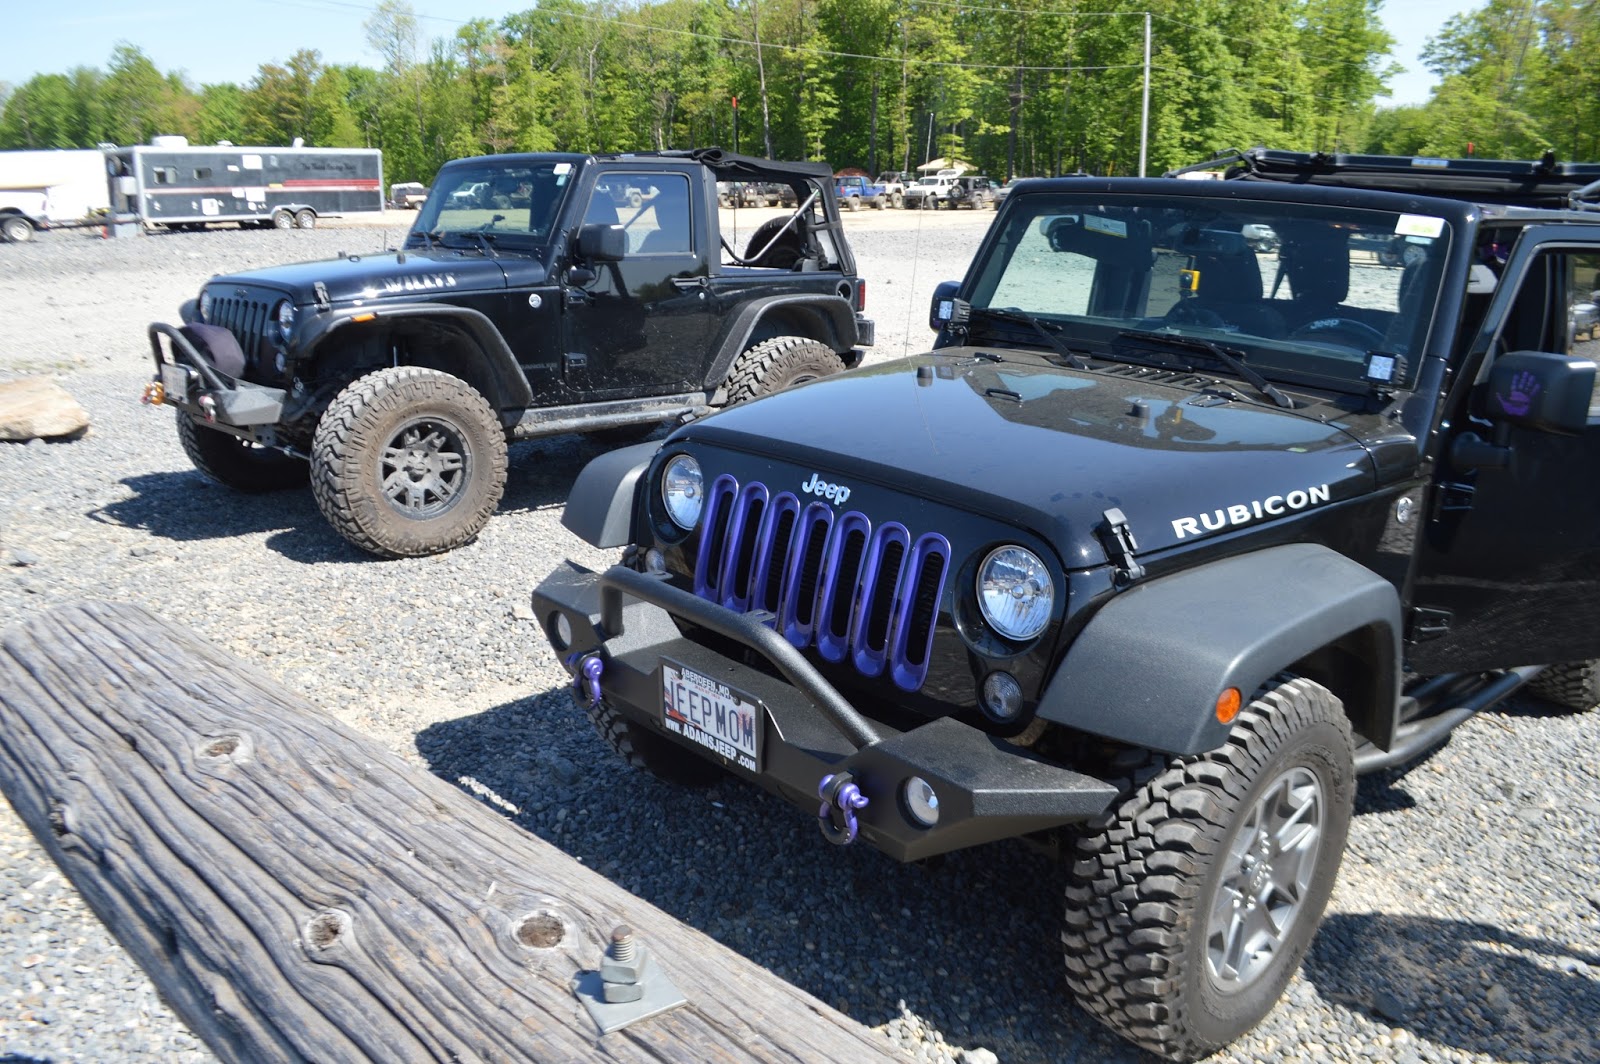 There is No Disgrace In A Stock Jeep Wrangler! – Under The Sun Inserts